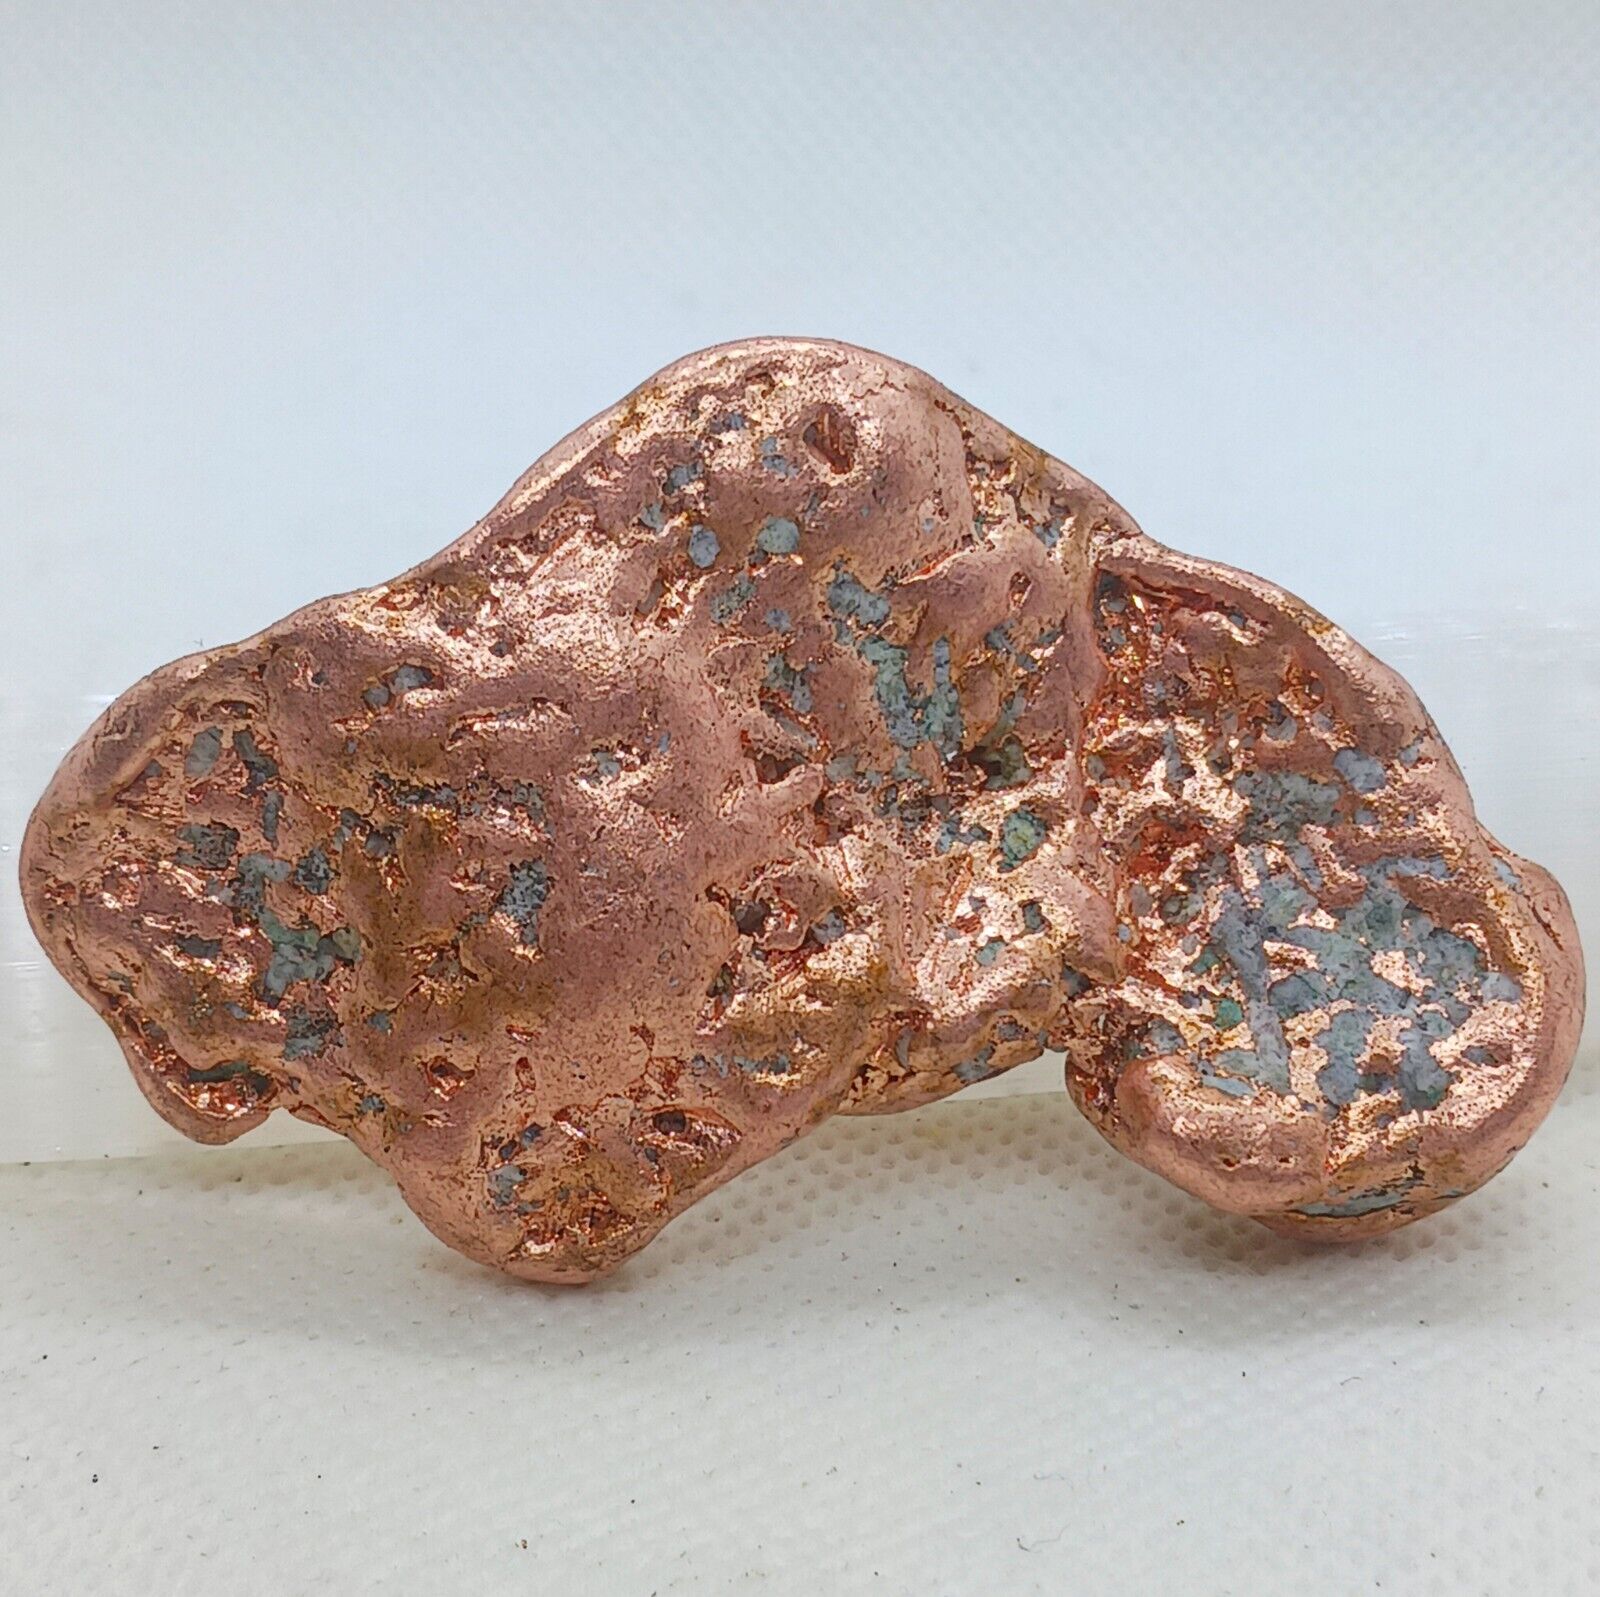 Raw Native Copper Specimen With Chrysocolla Large Natural Healing Copper Nugget 